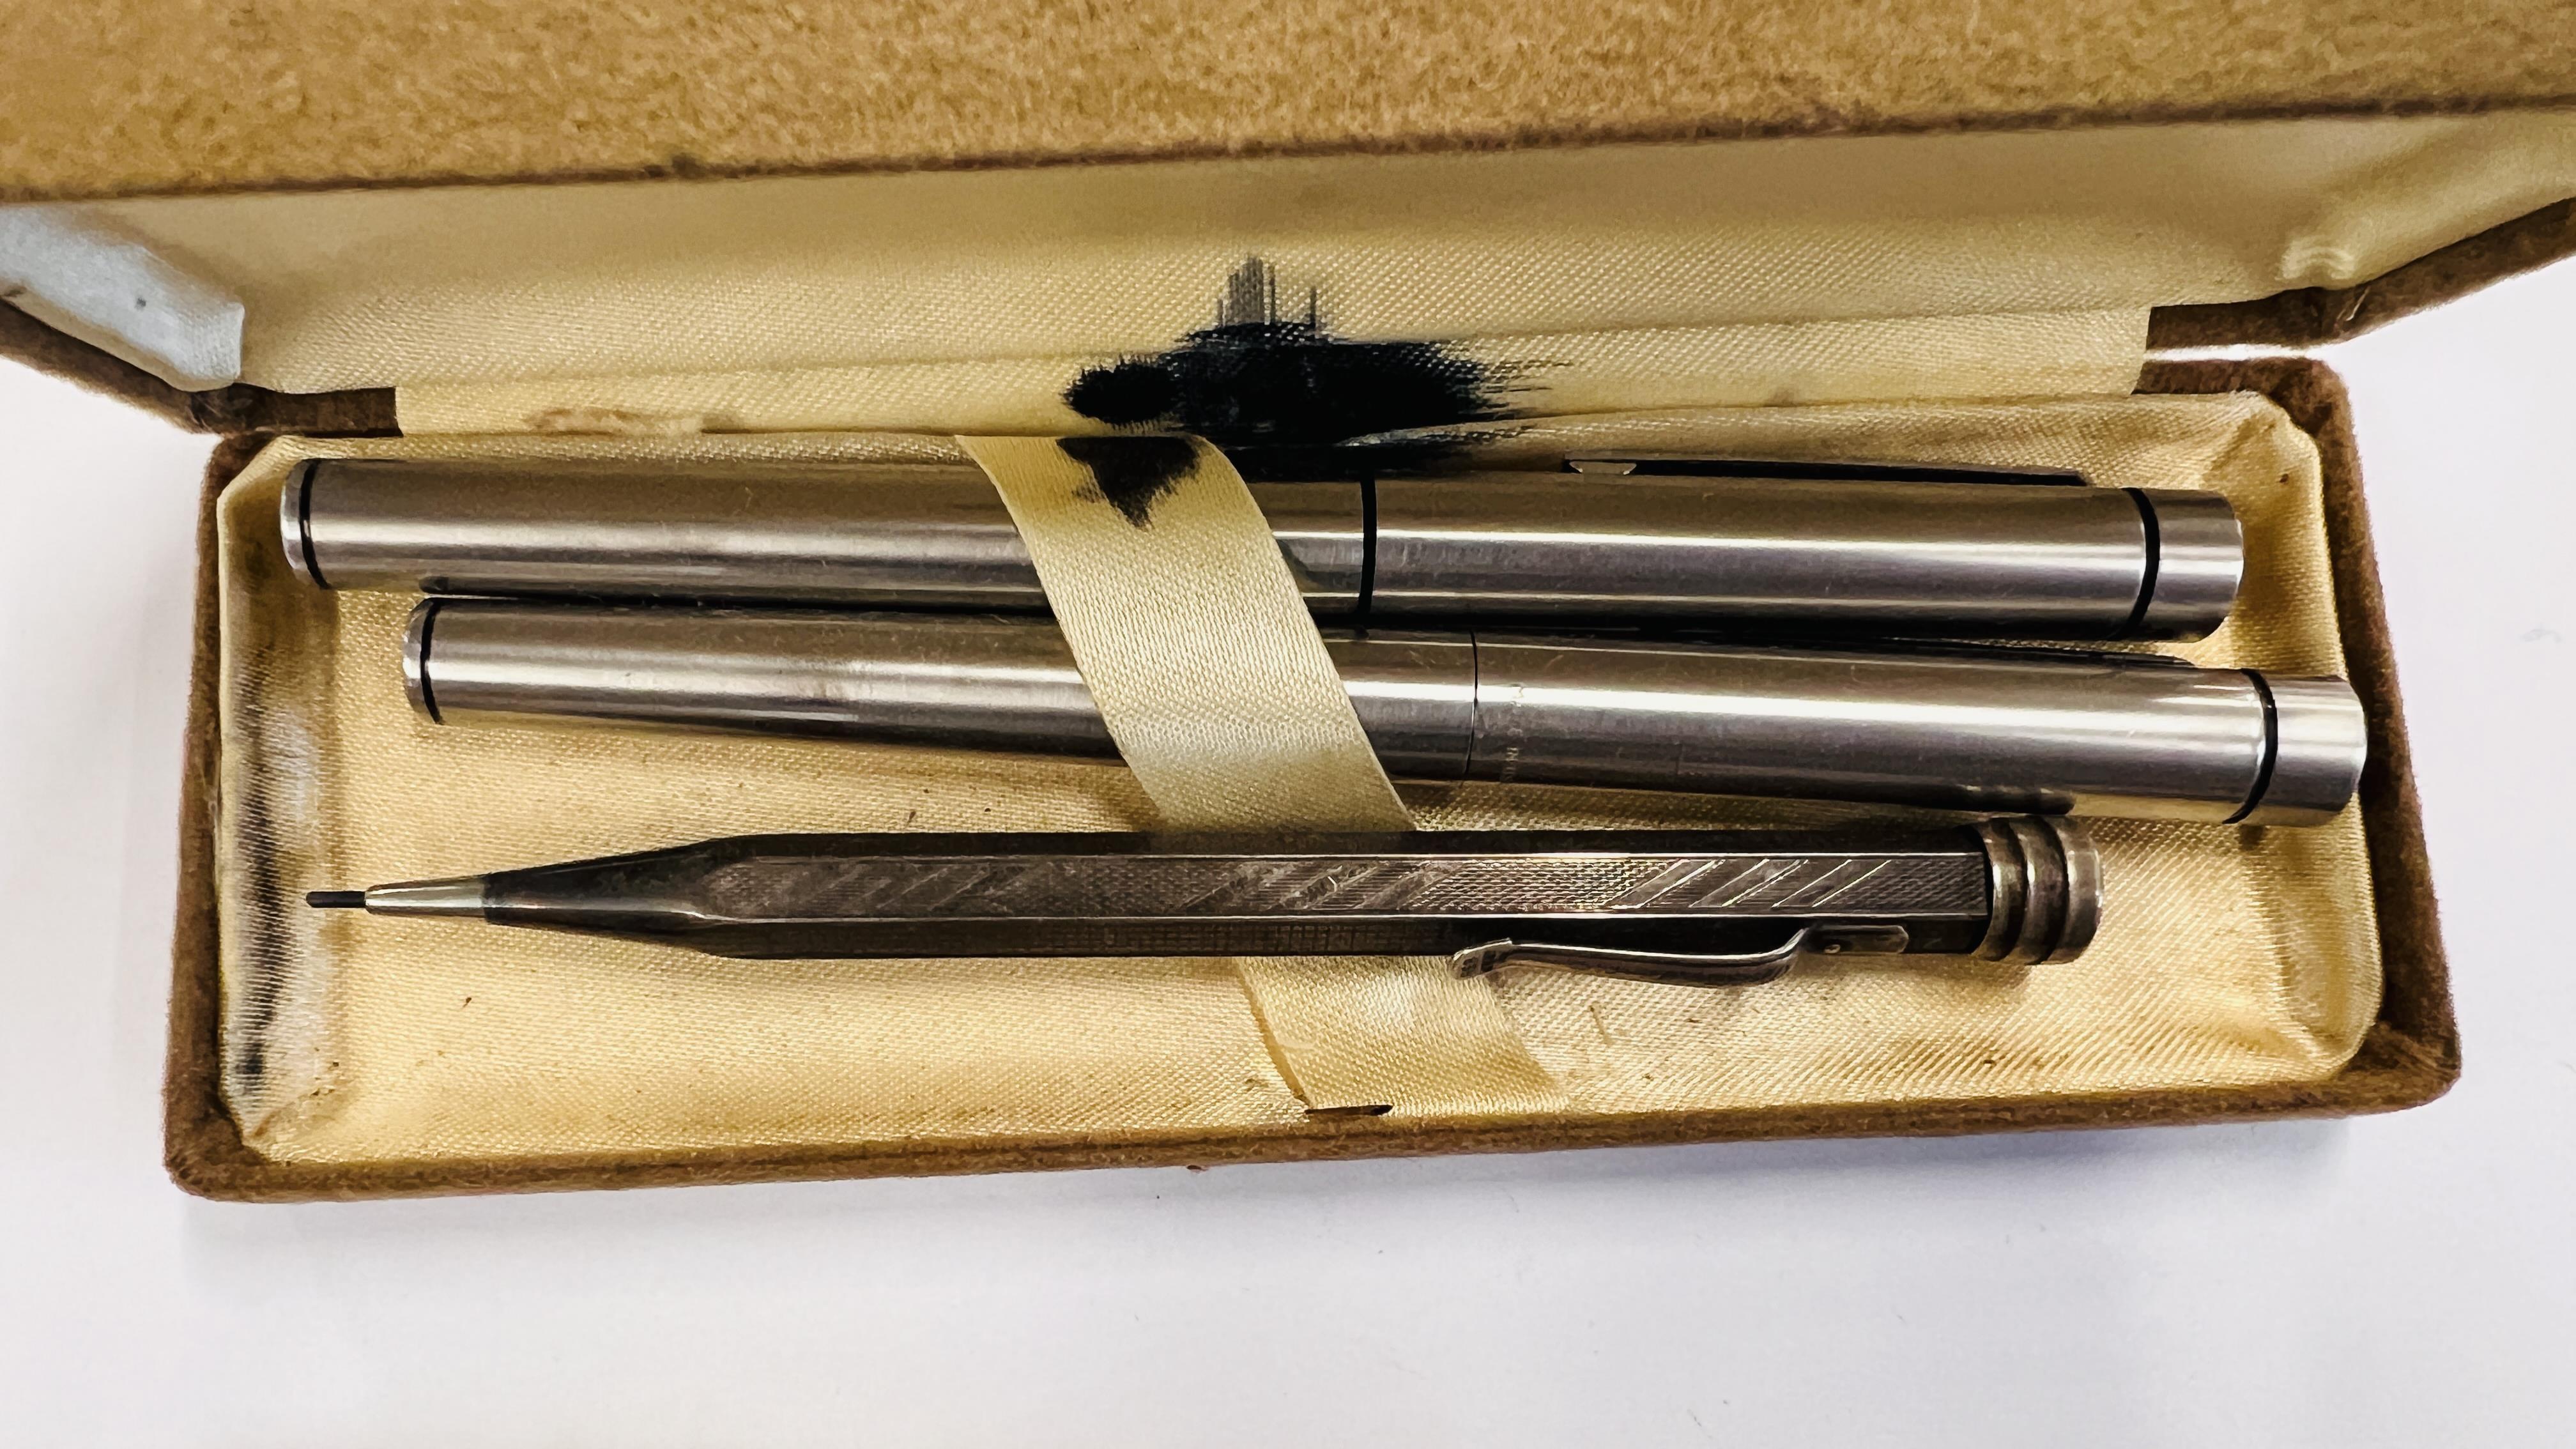 TWO SHEAFFER FOUNTAIN PENS AND BOX ALONG WITH A VINTAGE PROPELLING PENCIL MARKED "SARASTRO" 835. - Image 3 of 4